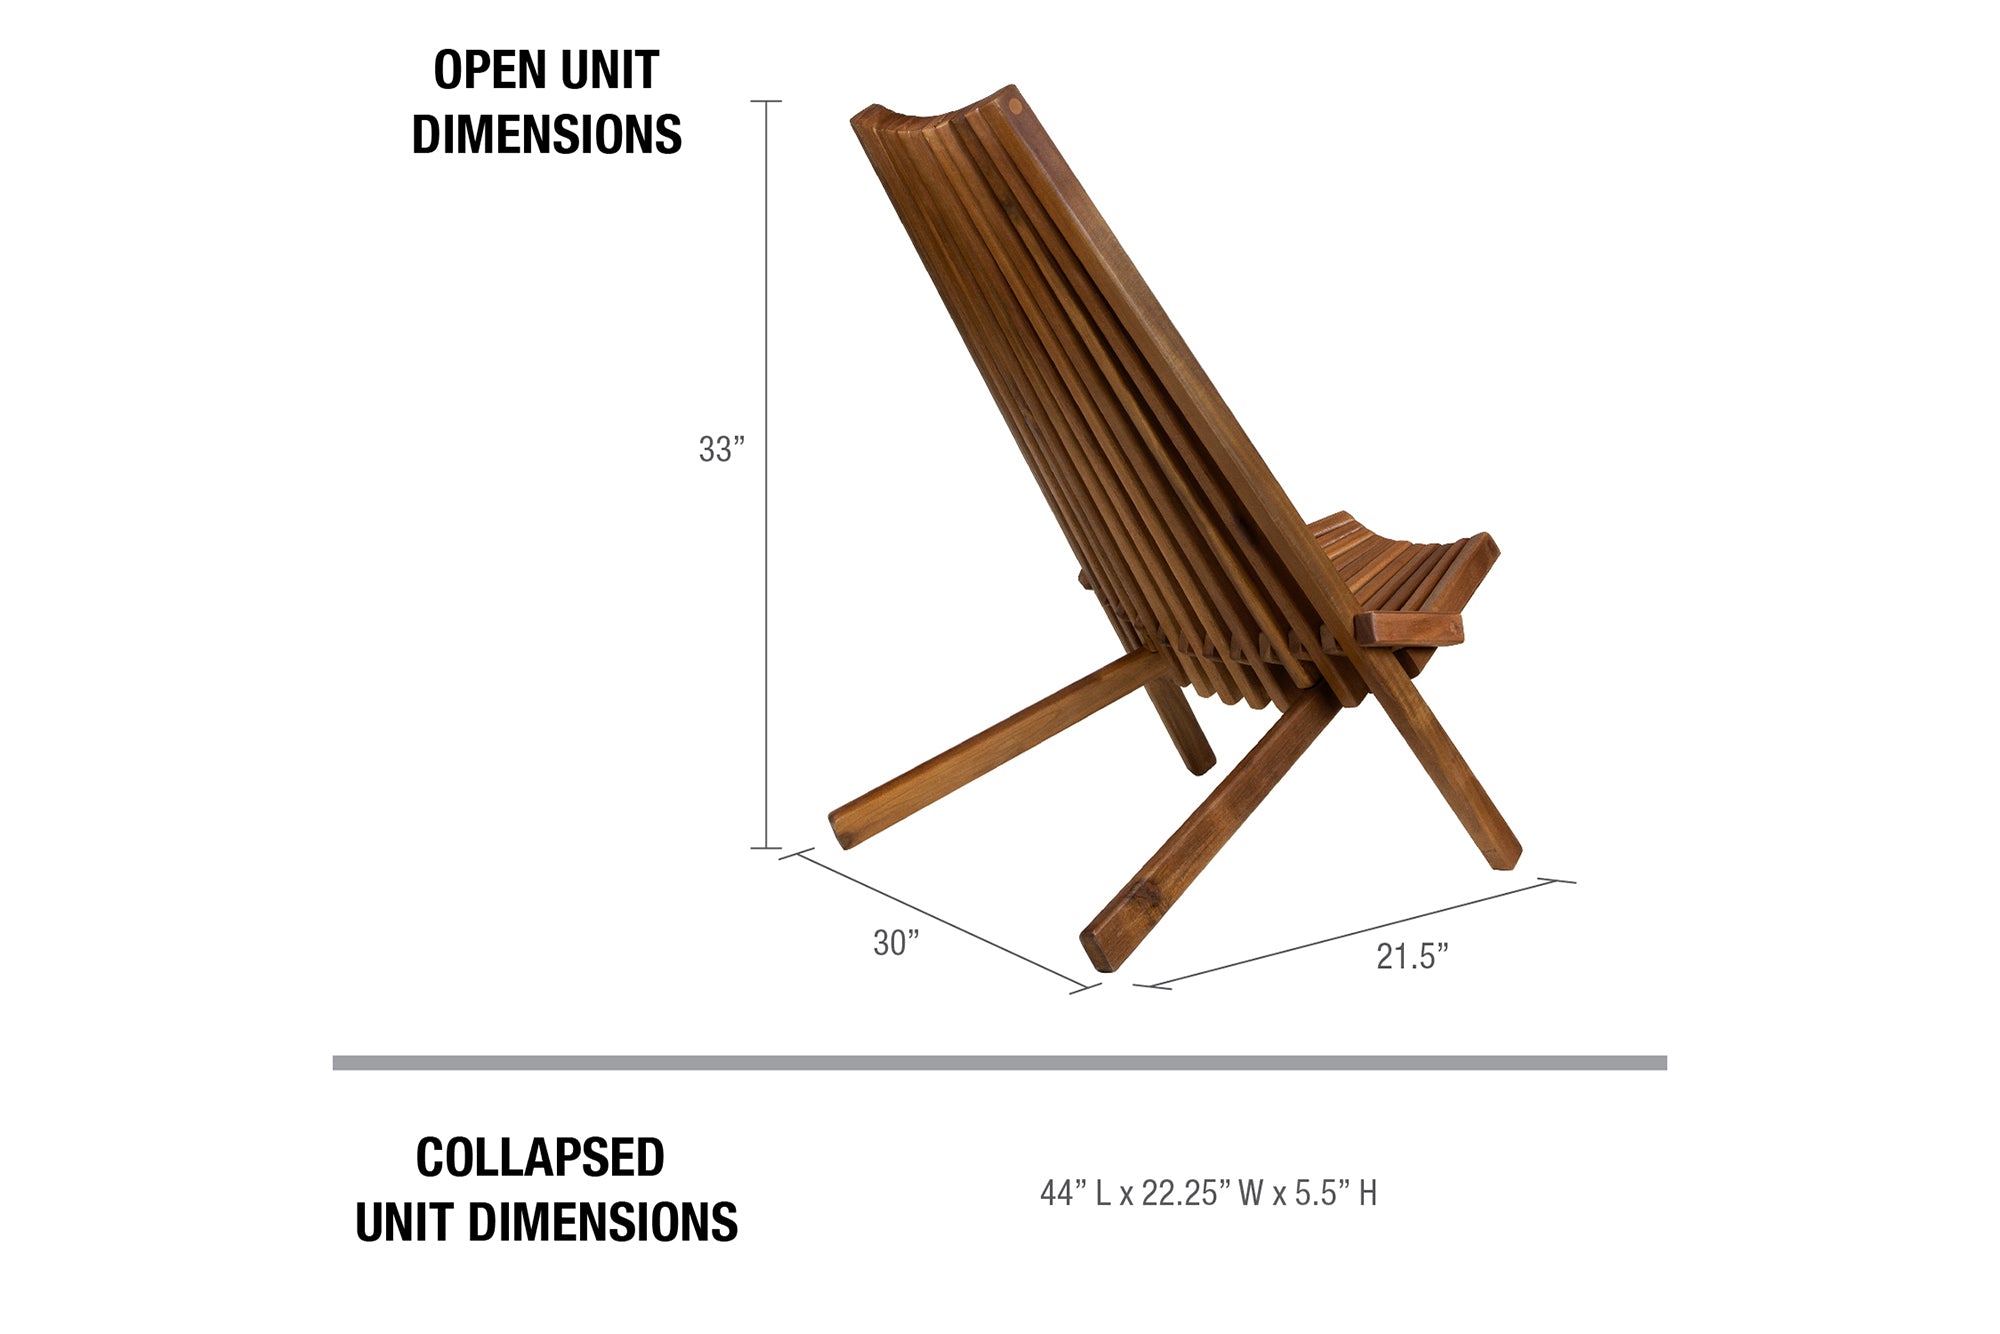 Wood Folding Outdoor Chairs  : Wersee Wooden Outdoor Chair Factory ,A Experenced Wooden Outdoor Furniture Factry In China, Which Is Founded In Aprial 2004 And Located In Suzhou City,Jiangsu Province Where Has Abundant Timeber Resources And Great History.